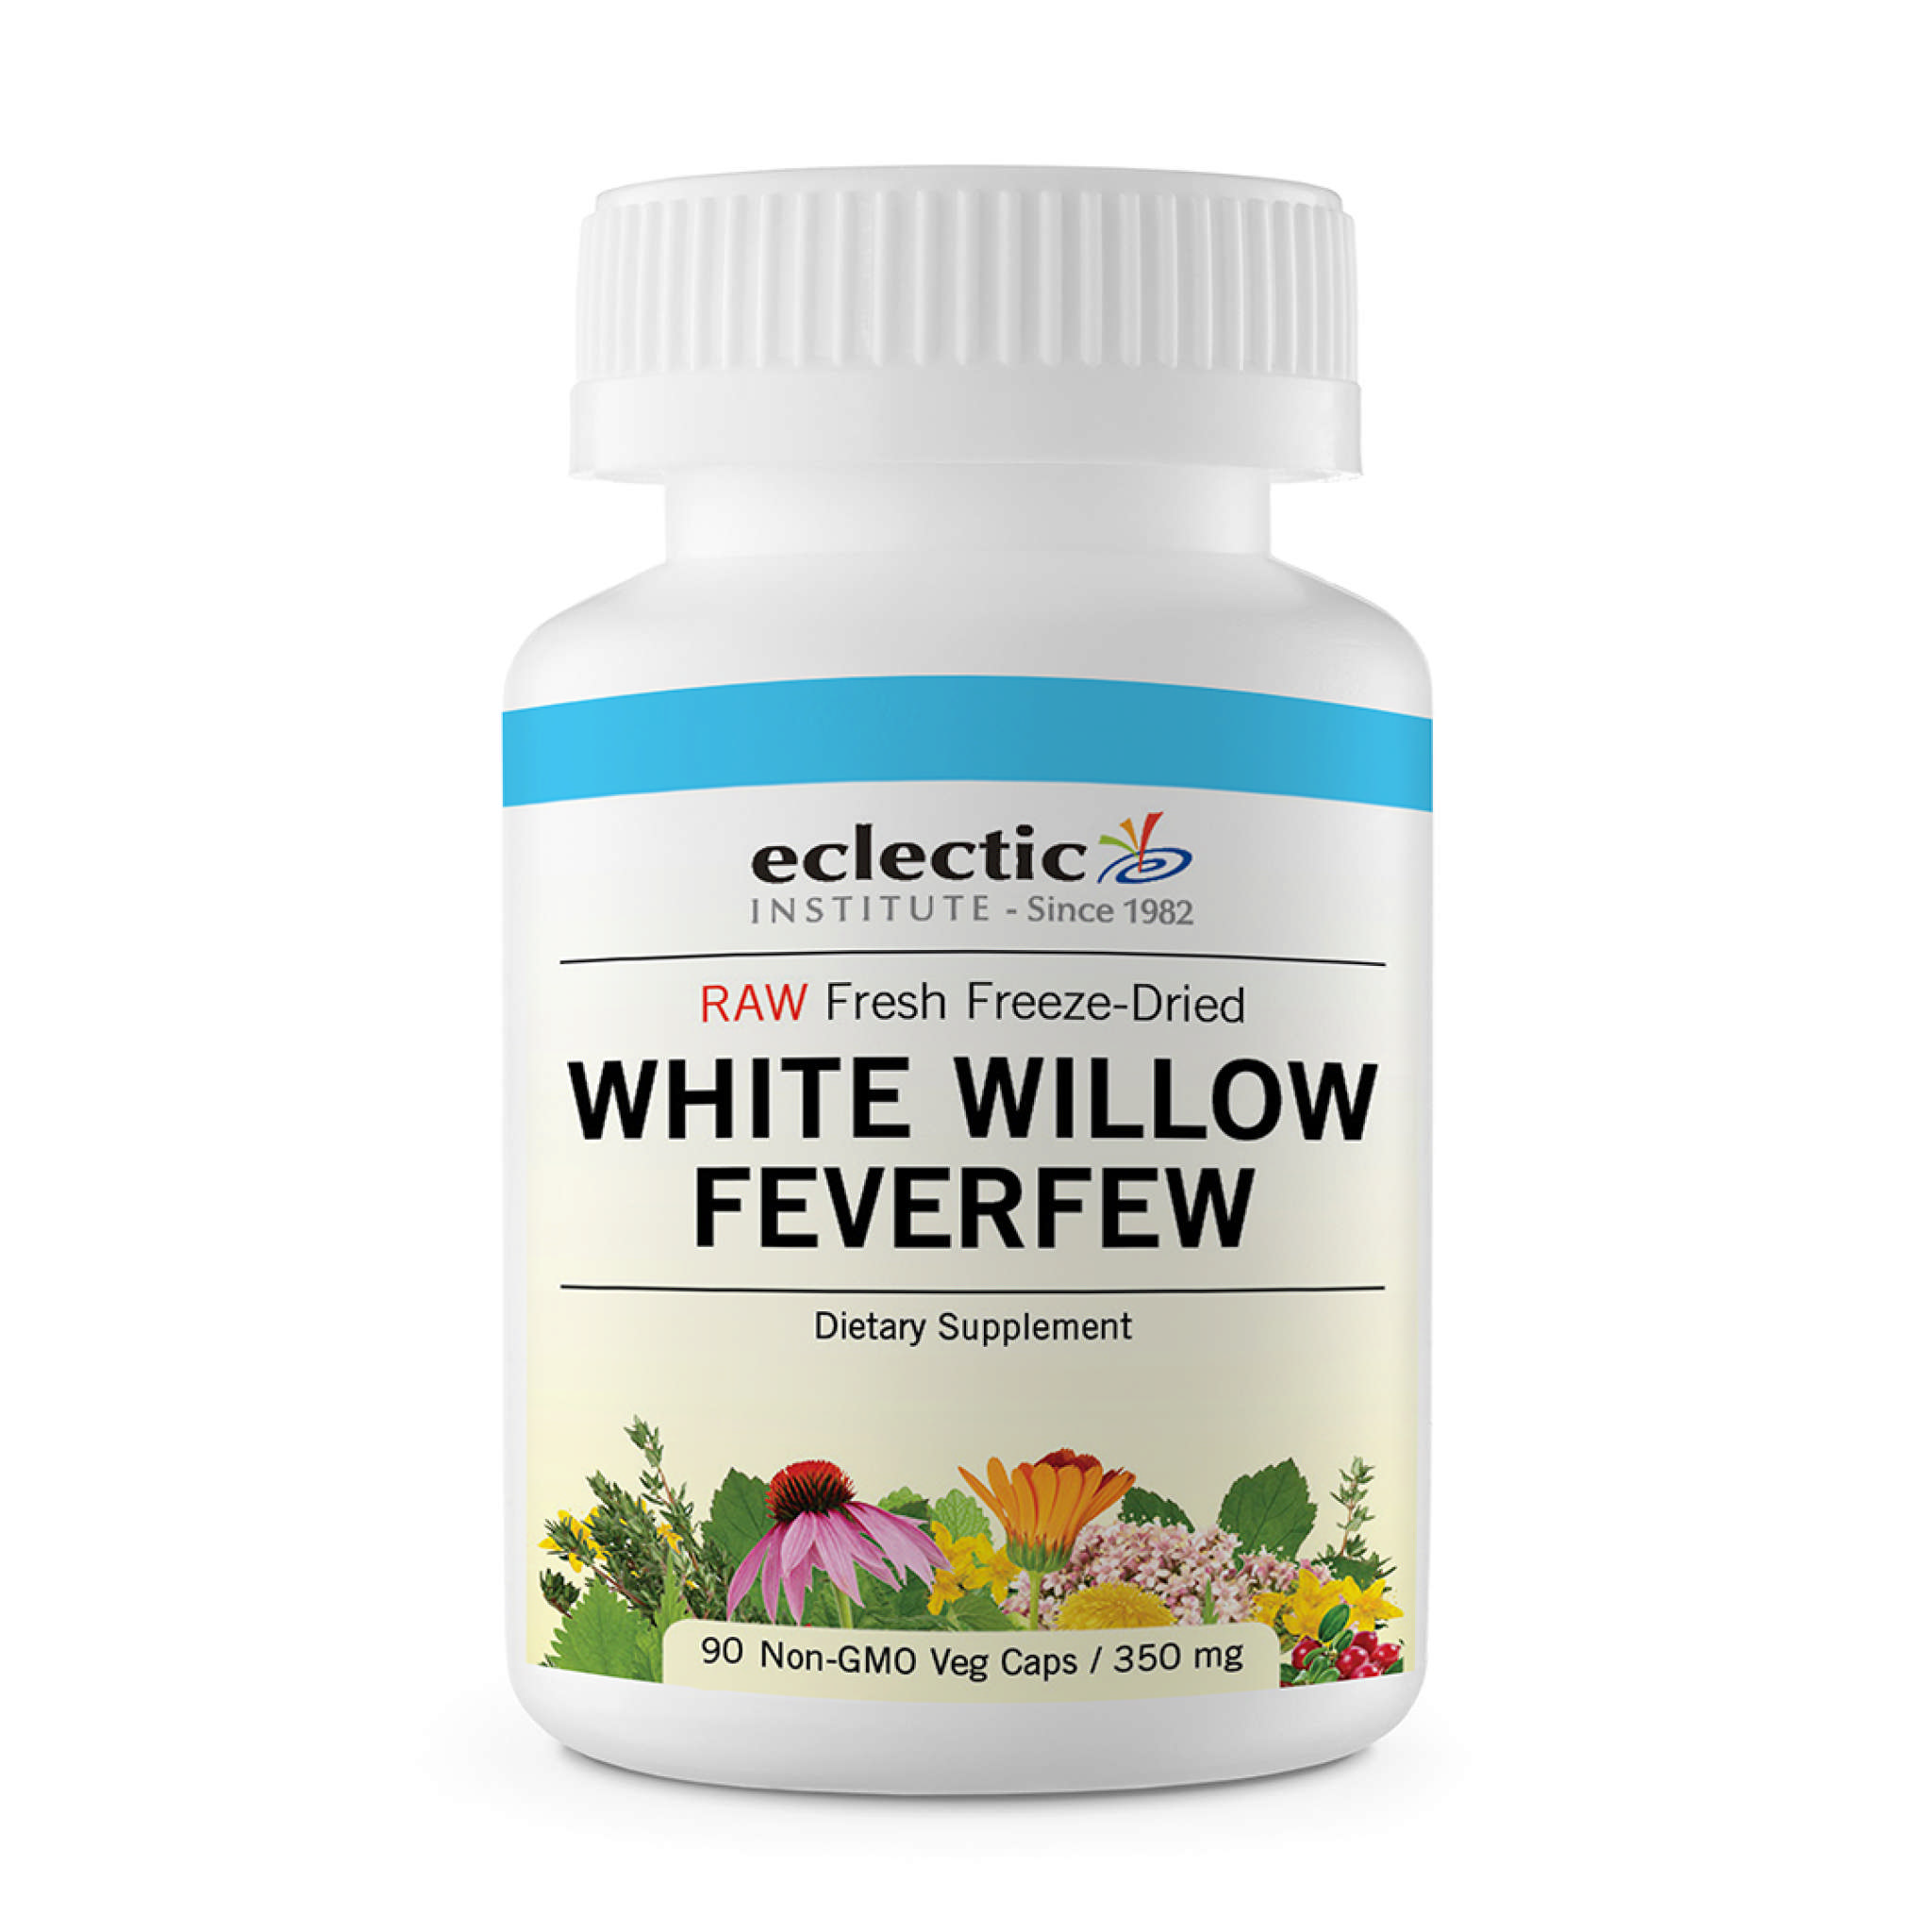 Eclectic Institute - White Willow Feverfew 350 mg F